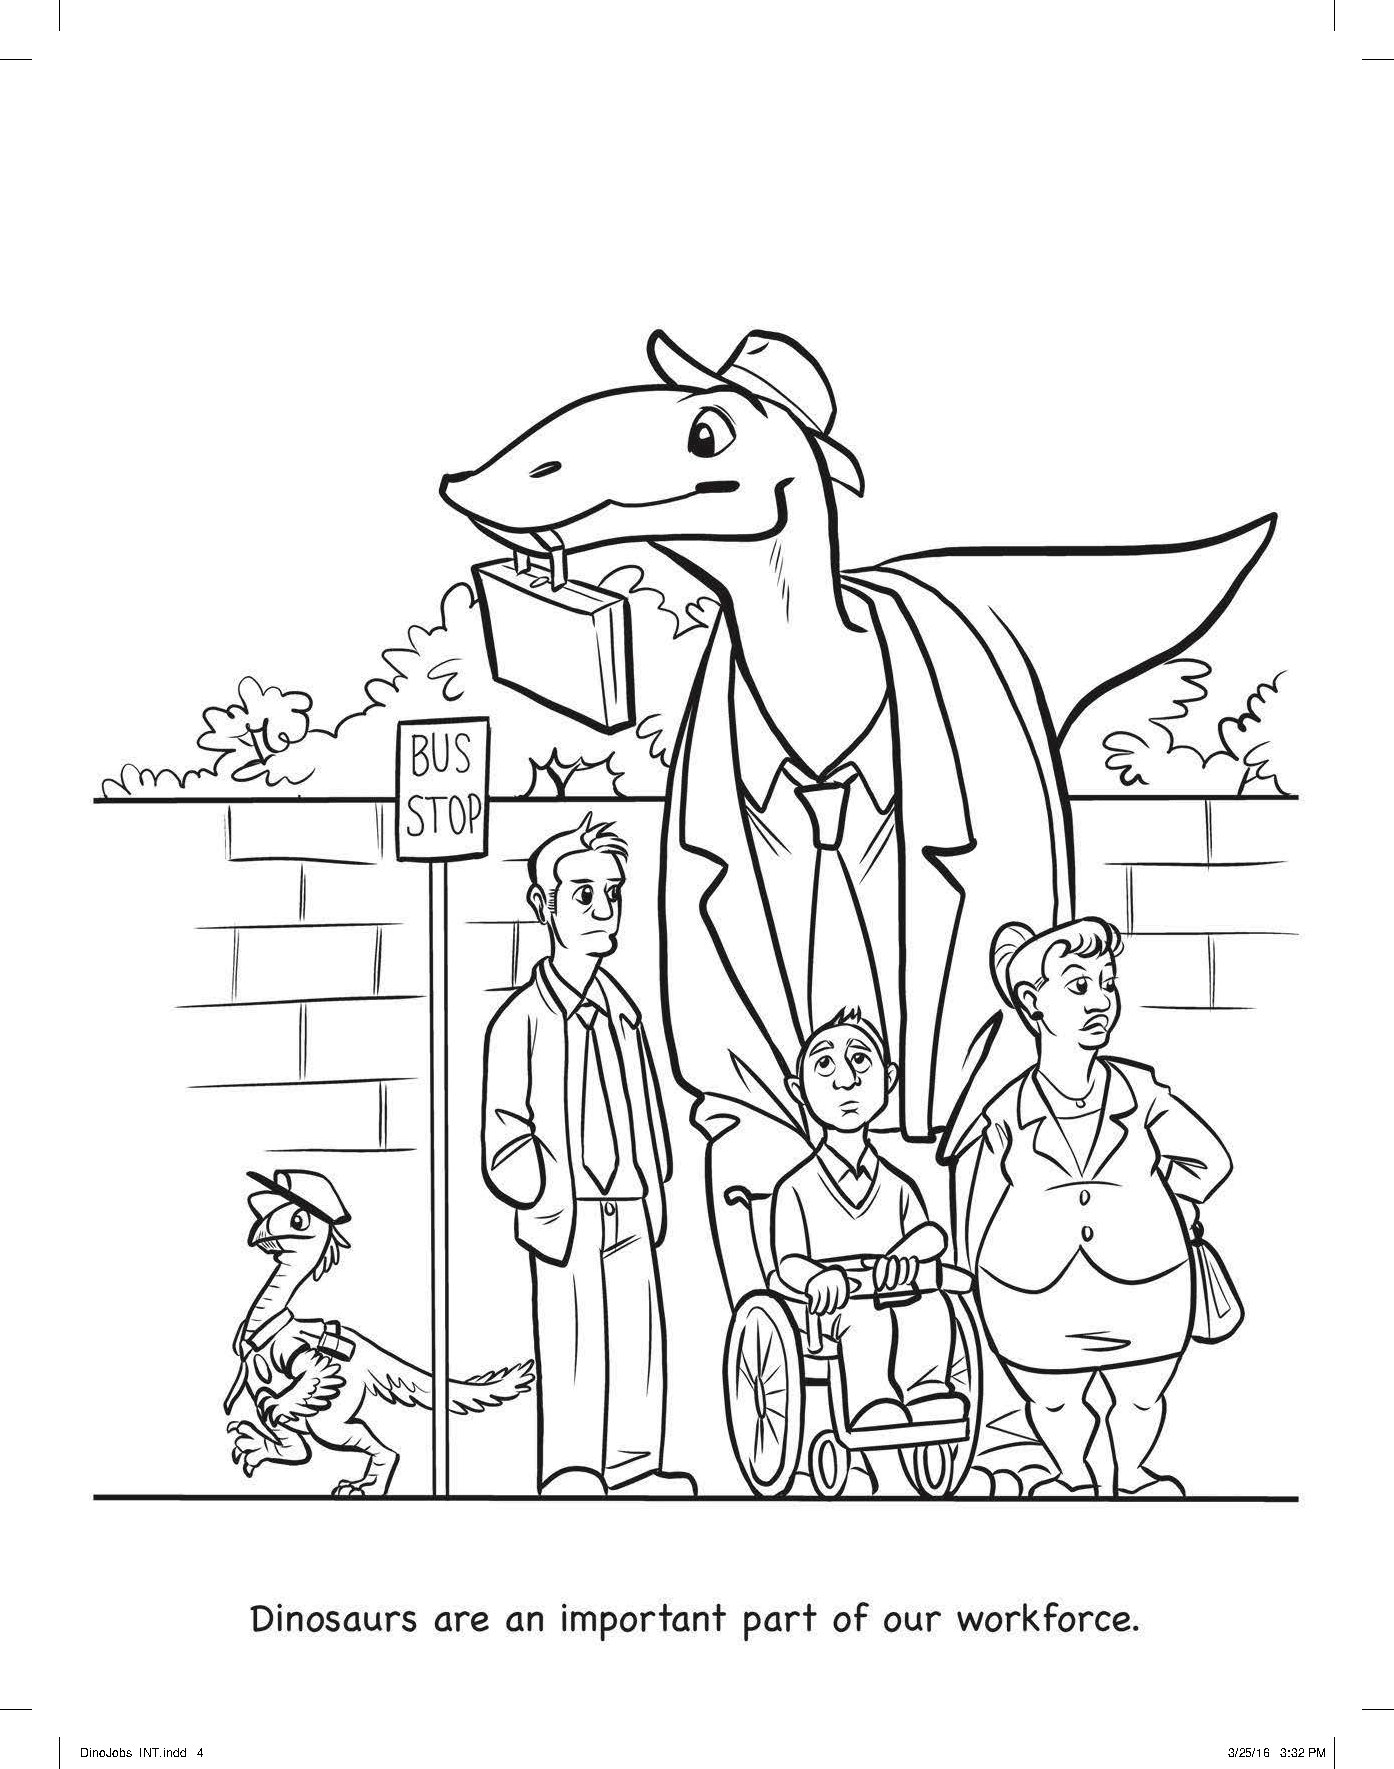 Dinosaurs with Jobs